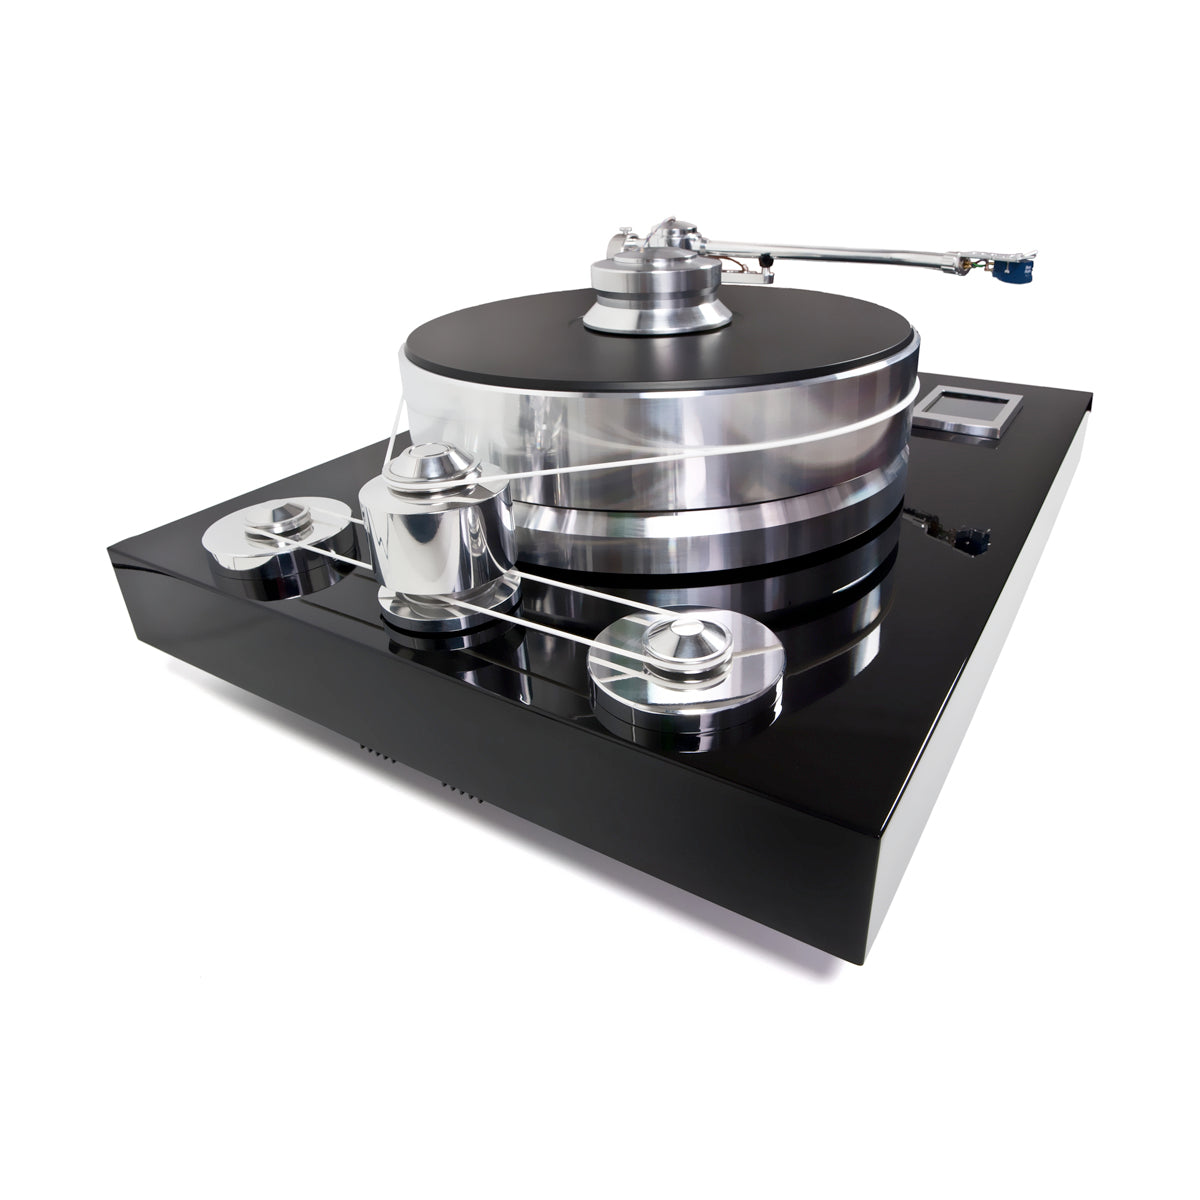 Pro-Ject Signature 12 turntable - The Audio Experts